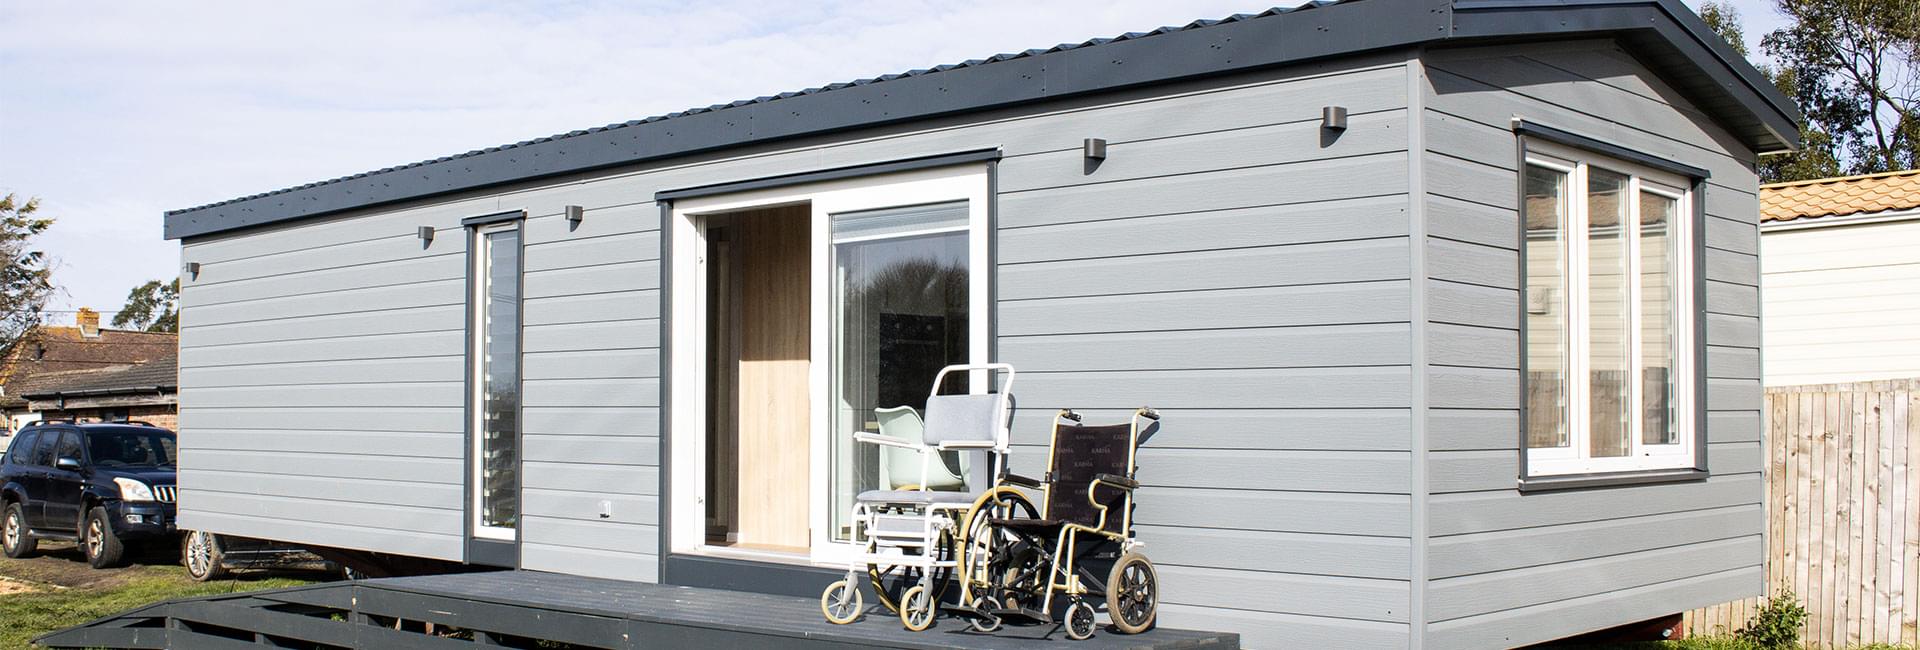 housing for people with disabilities